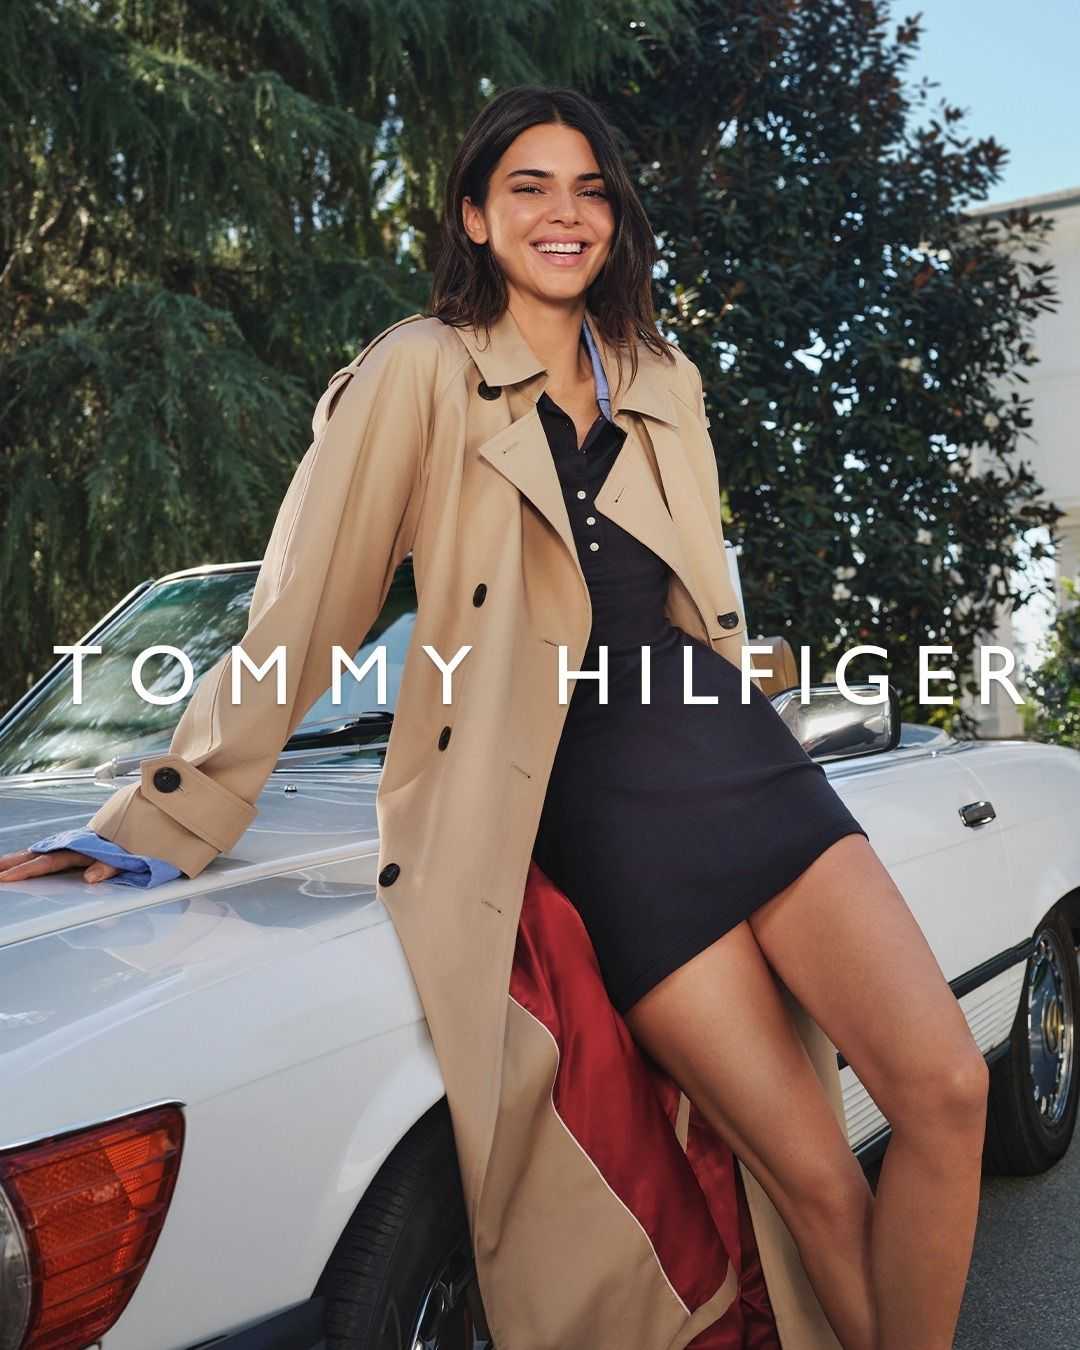 Tommy Hilfiger - RENELL MEDRANO - 6527